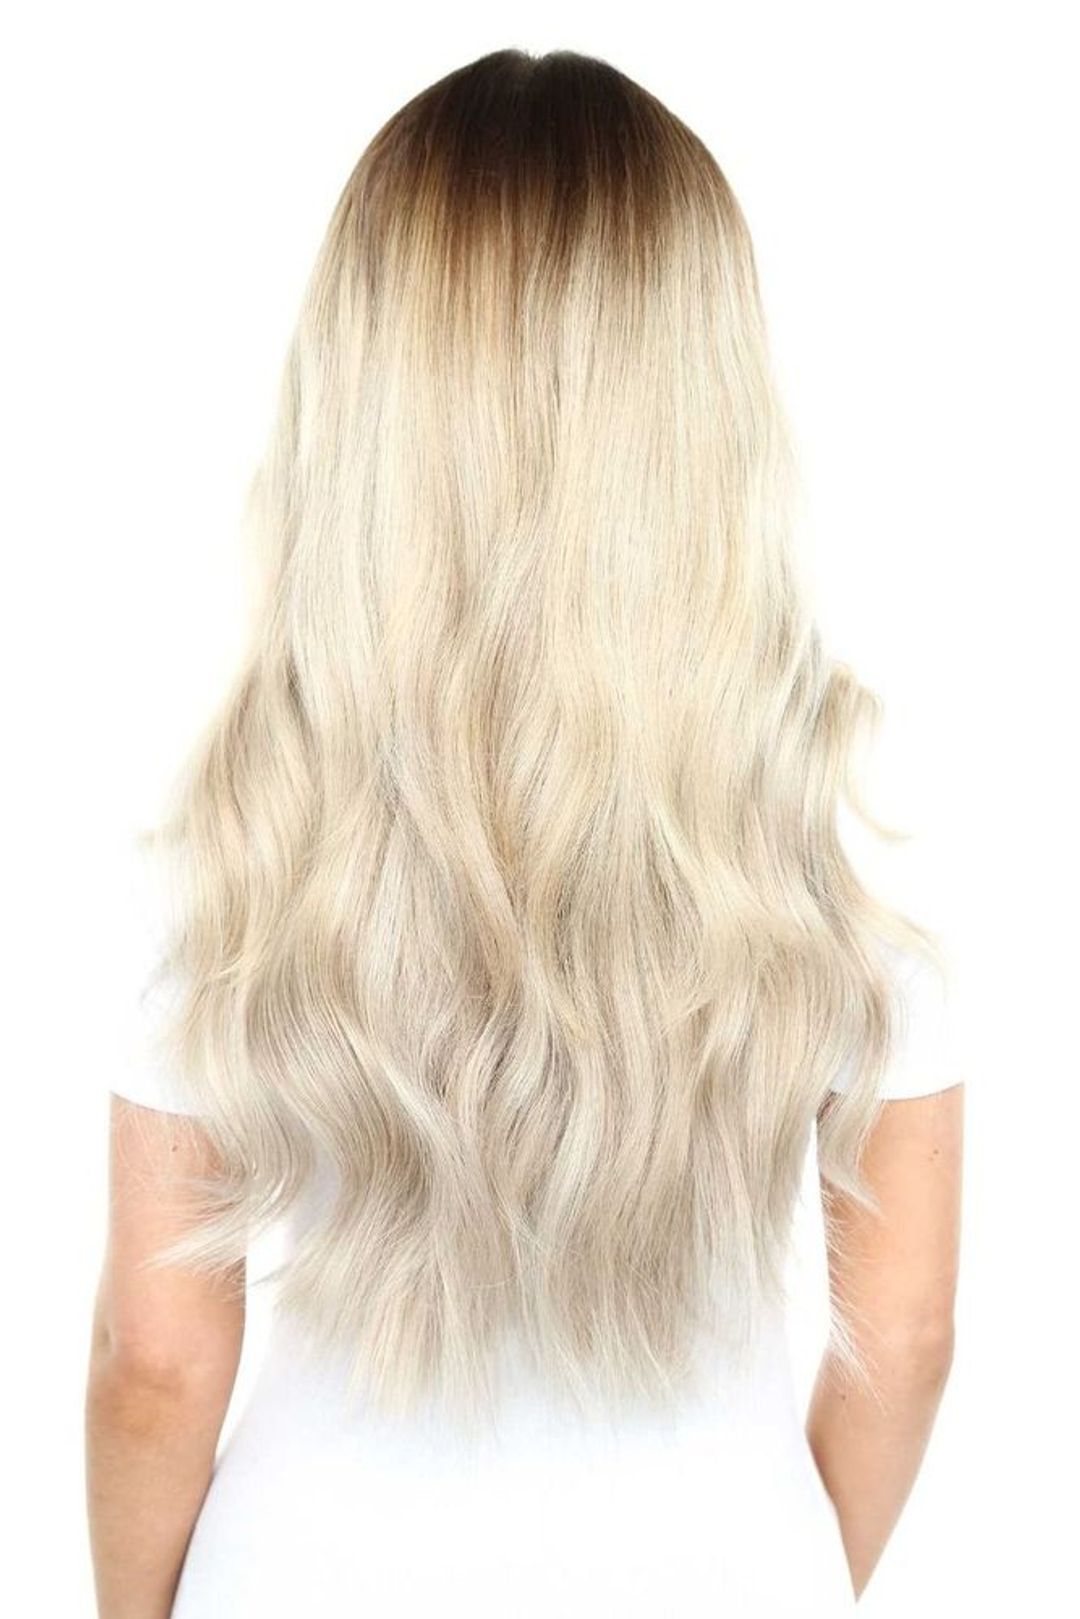 Beauty Works Gold Double Weft Extensions - Blondette,22"